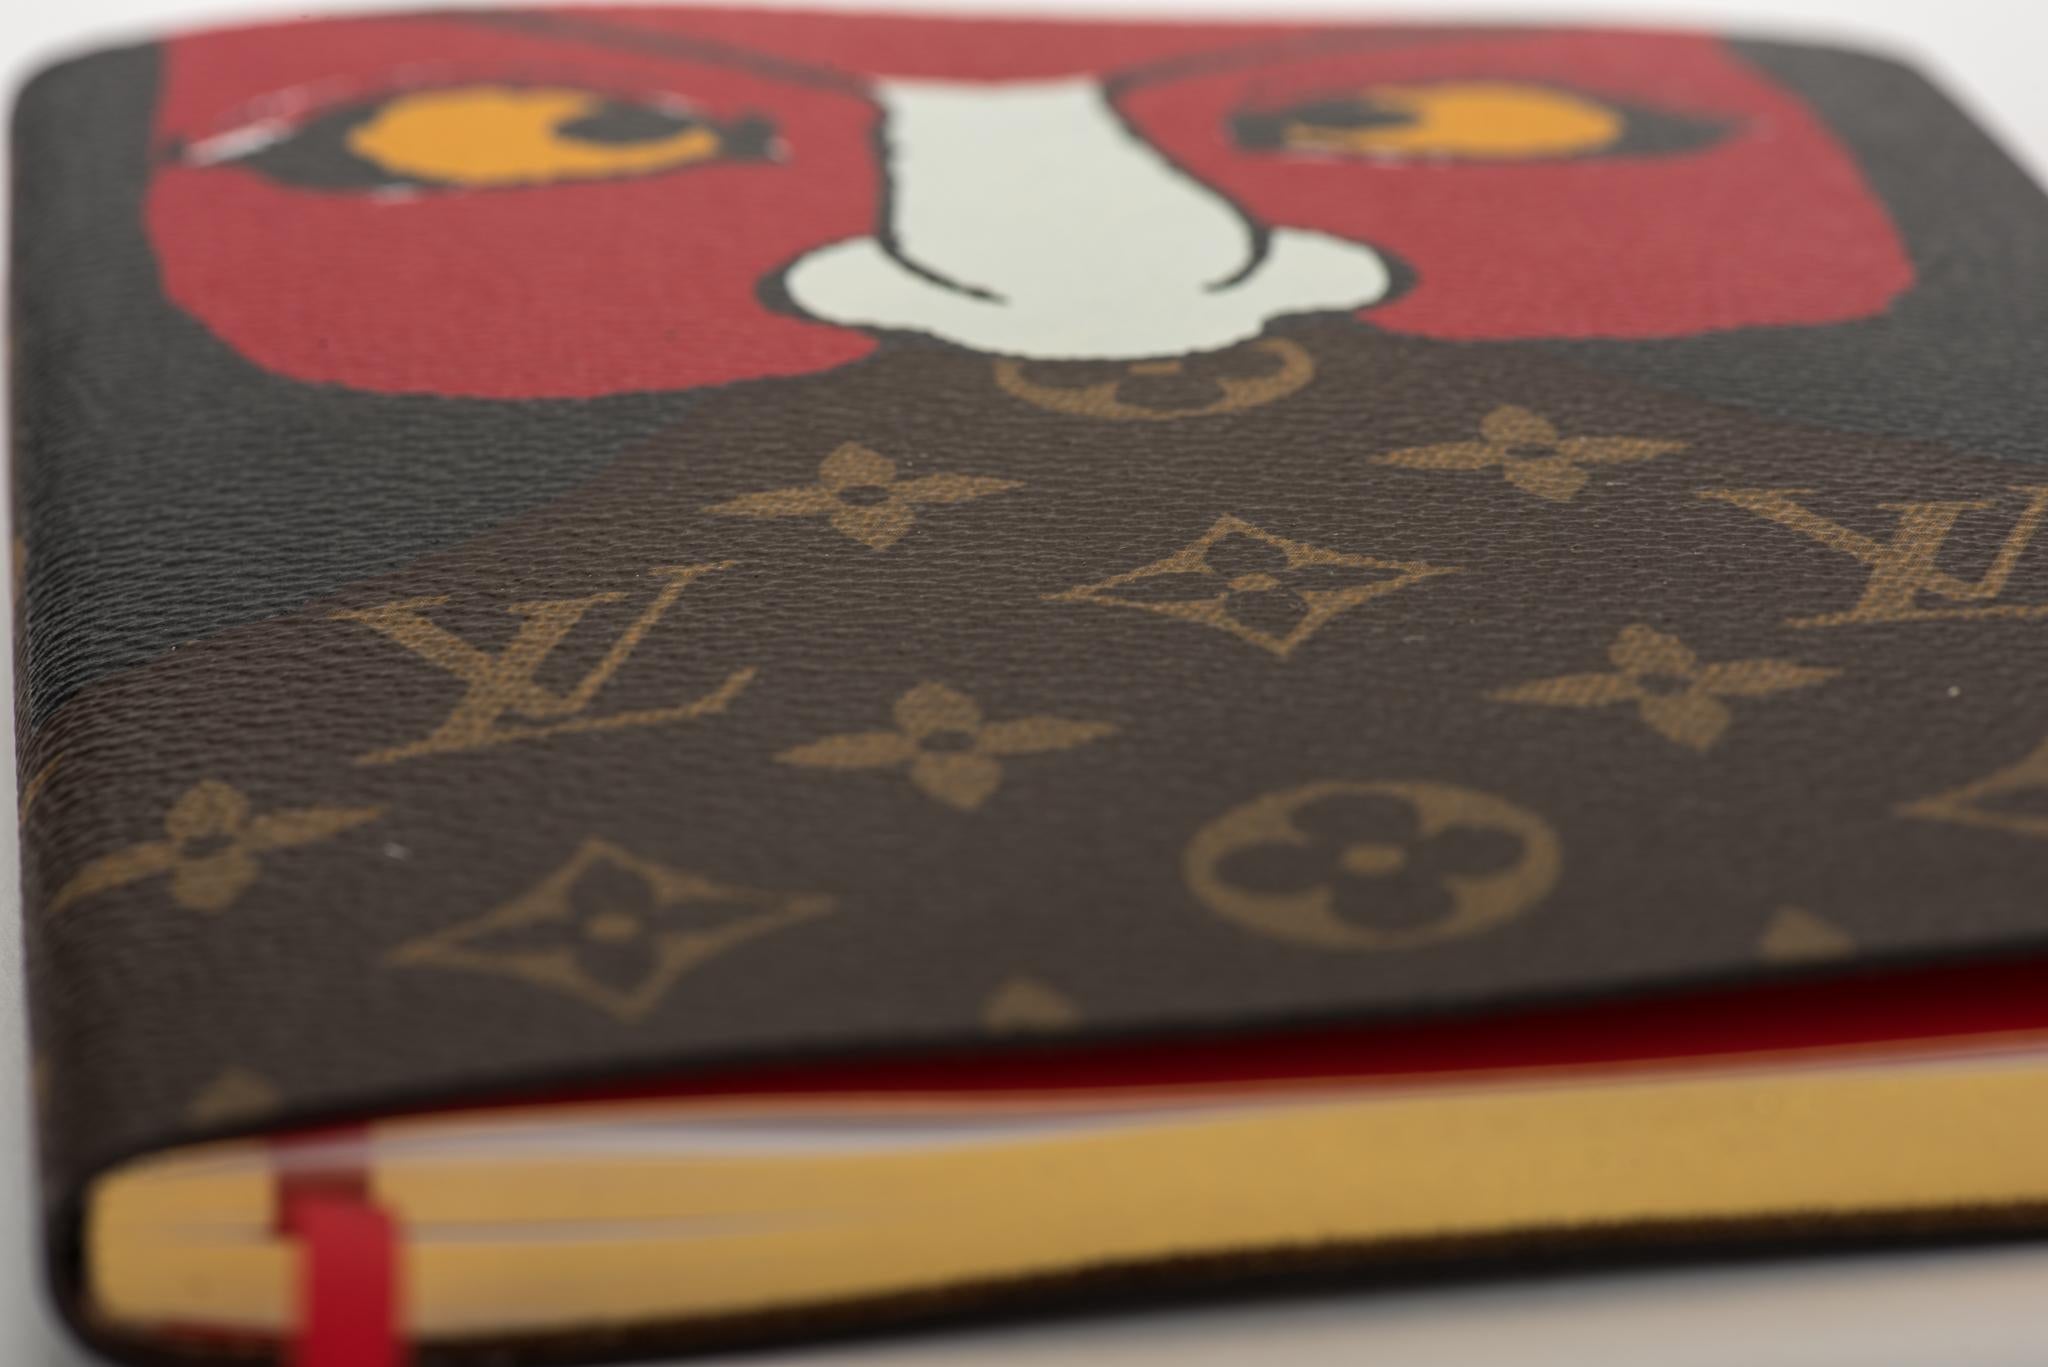 Louis Vuitton limited edition Kabuki notebook covered with monogram canvas and a kabuki mask. 2018 cruise collection. Brand new.